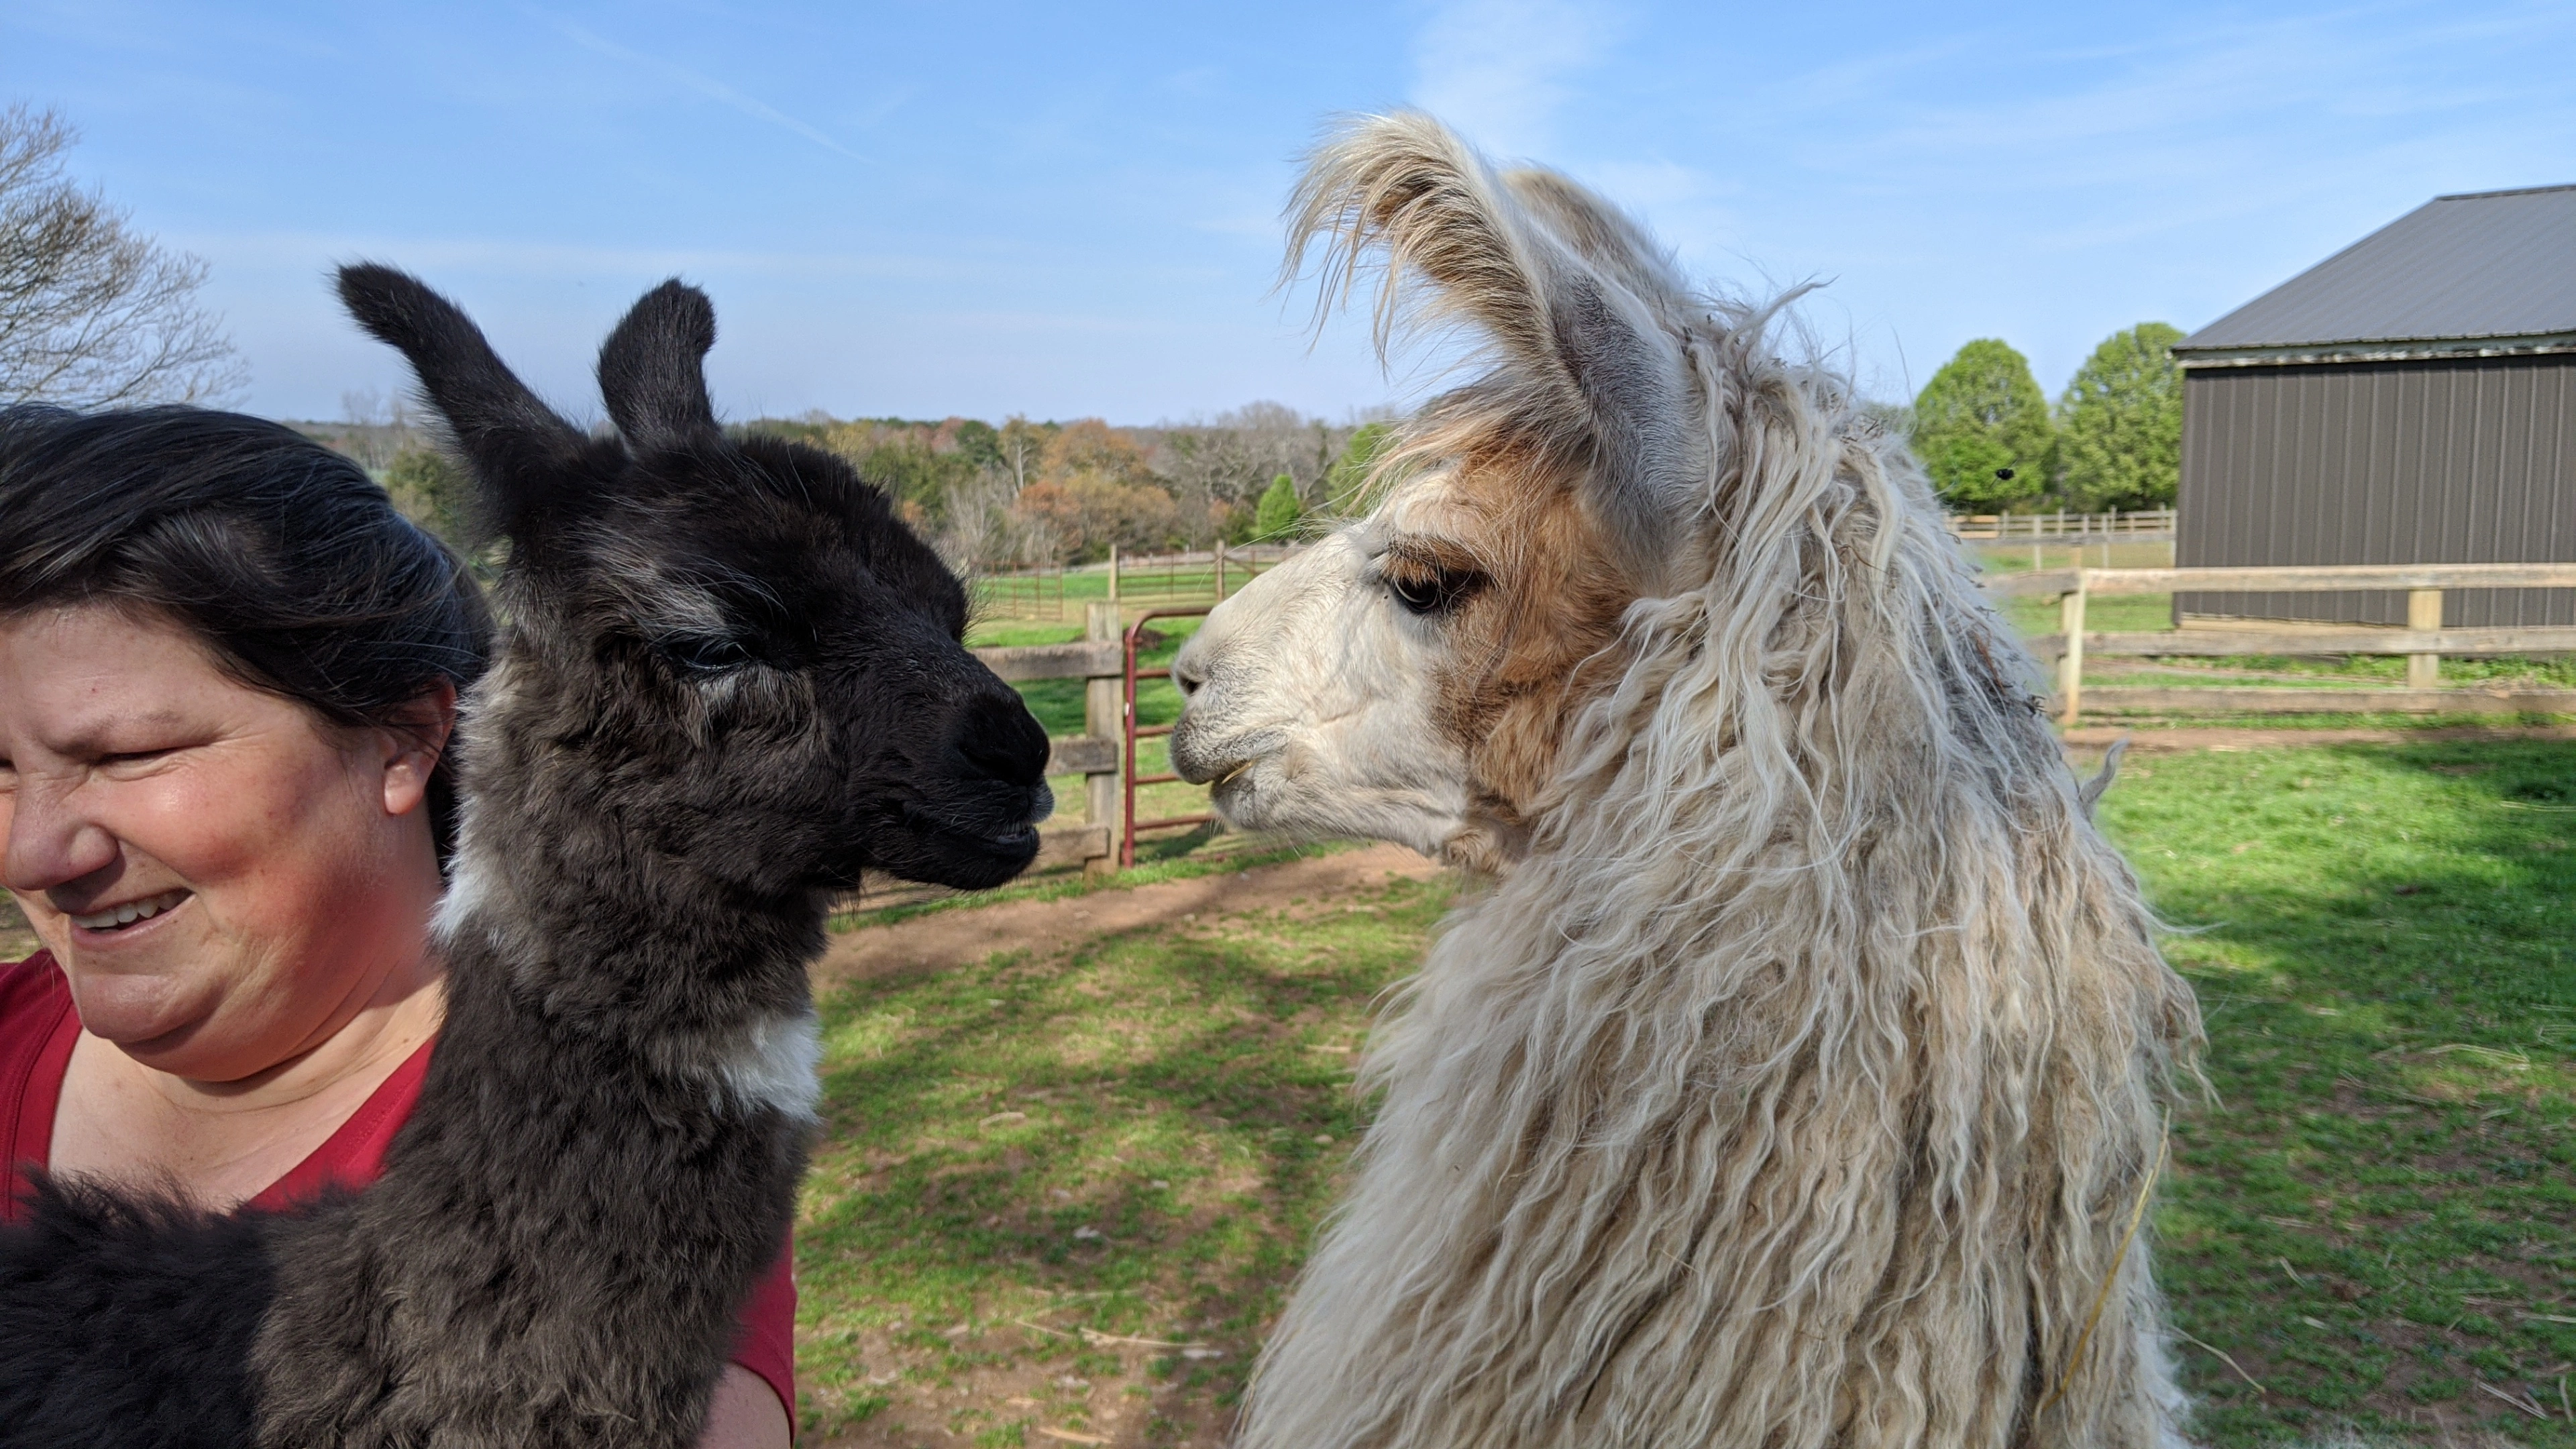 An image of a newborn llama named "OK Boomer" being held by Paige next to Boomer's mother, "Boo"